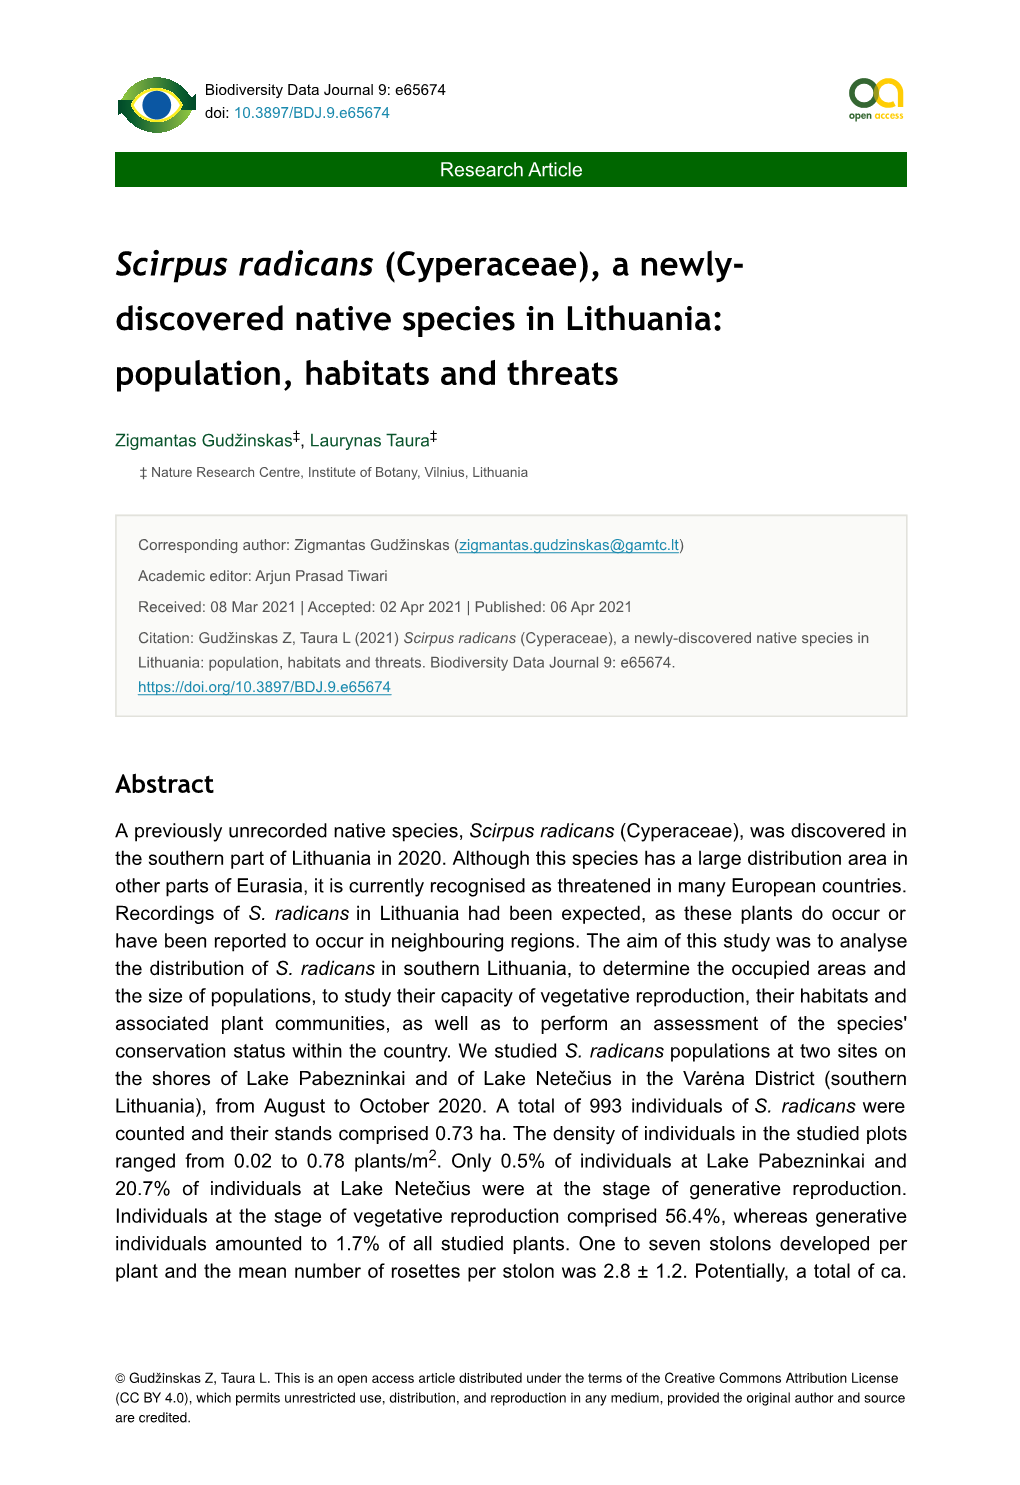 Scirpus Radicans (Cyperaceae), a Newly- Discovered Native Species in Lithuania: Population, Habitats and Threats